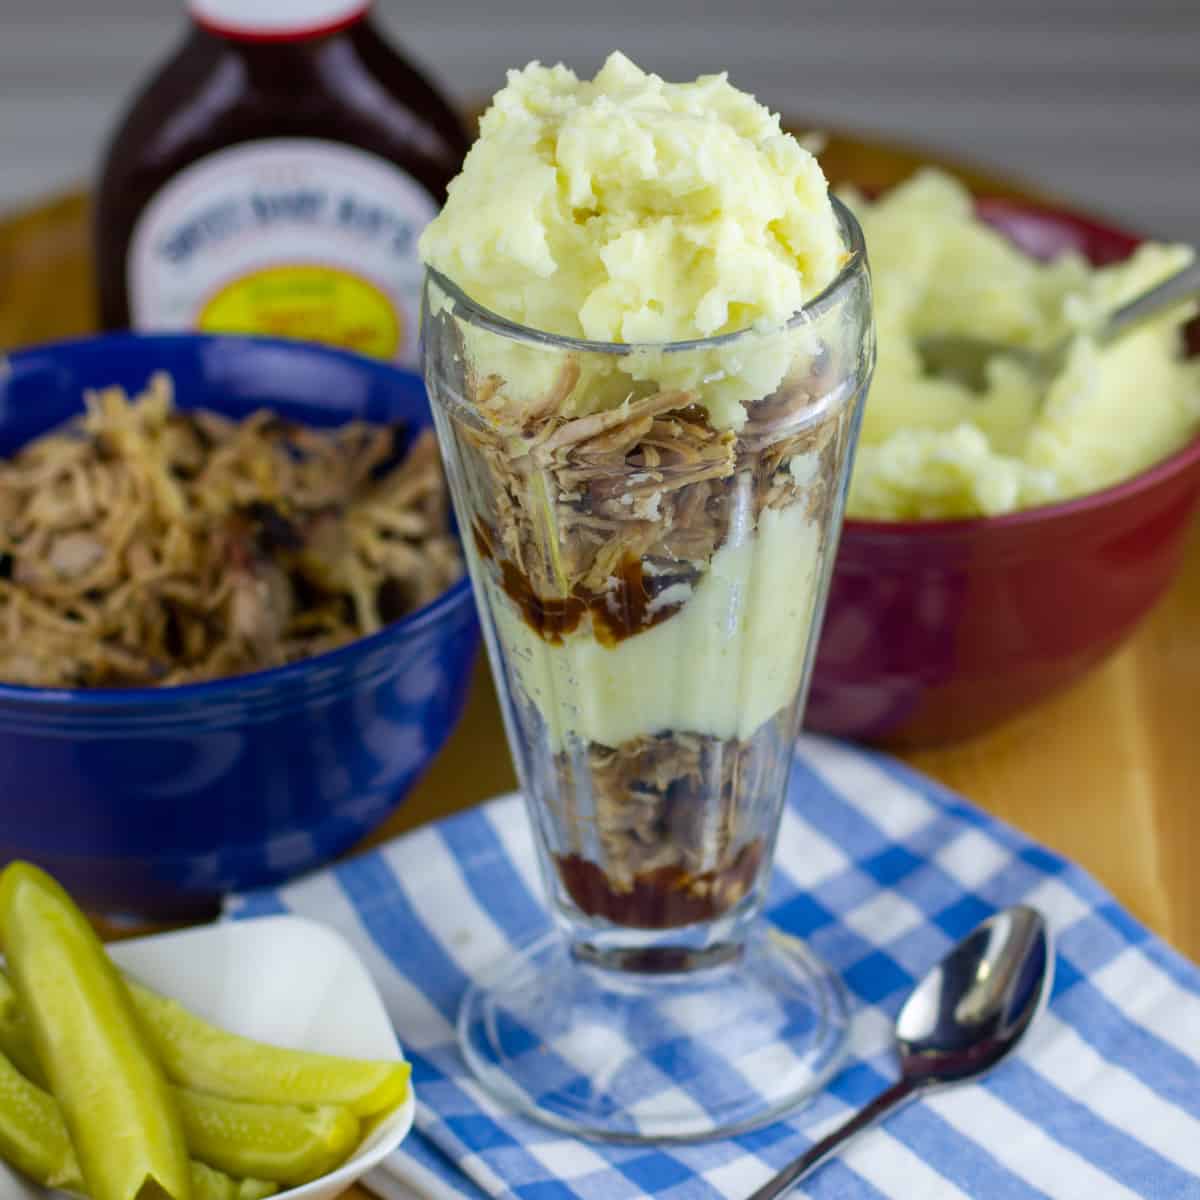 Layers of pulled pork and mashed potatoes added to a tall bowl.